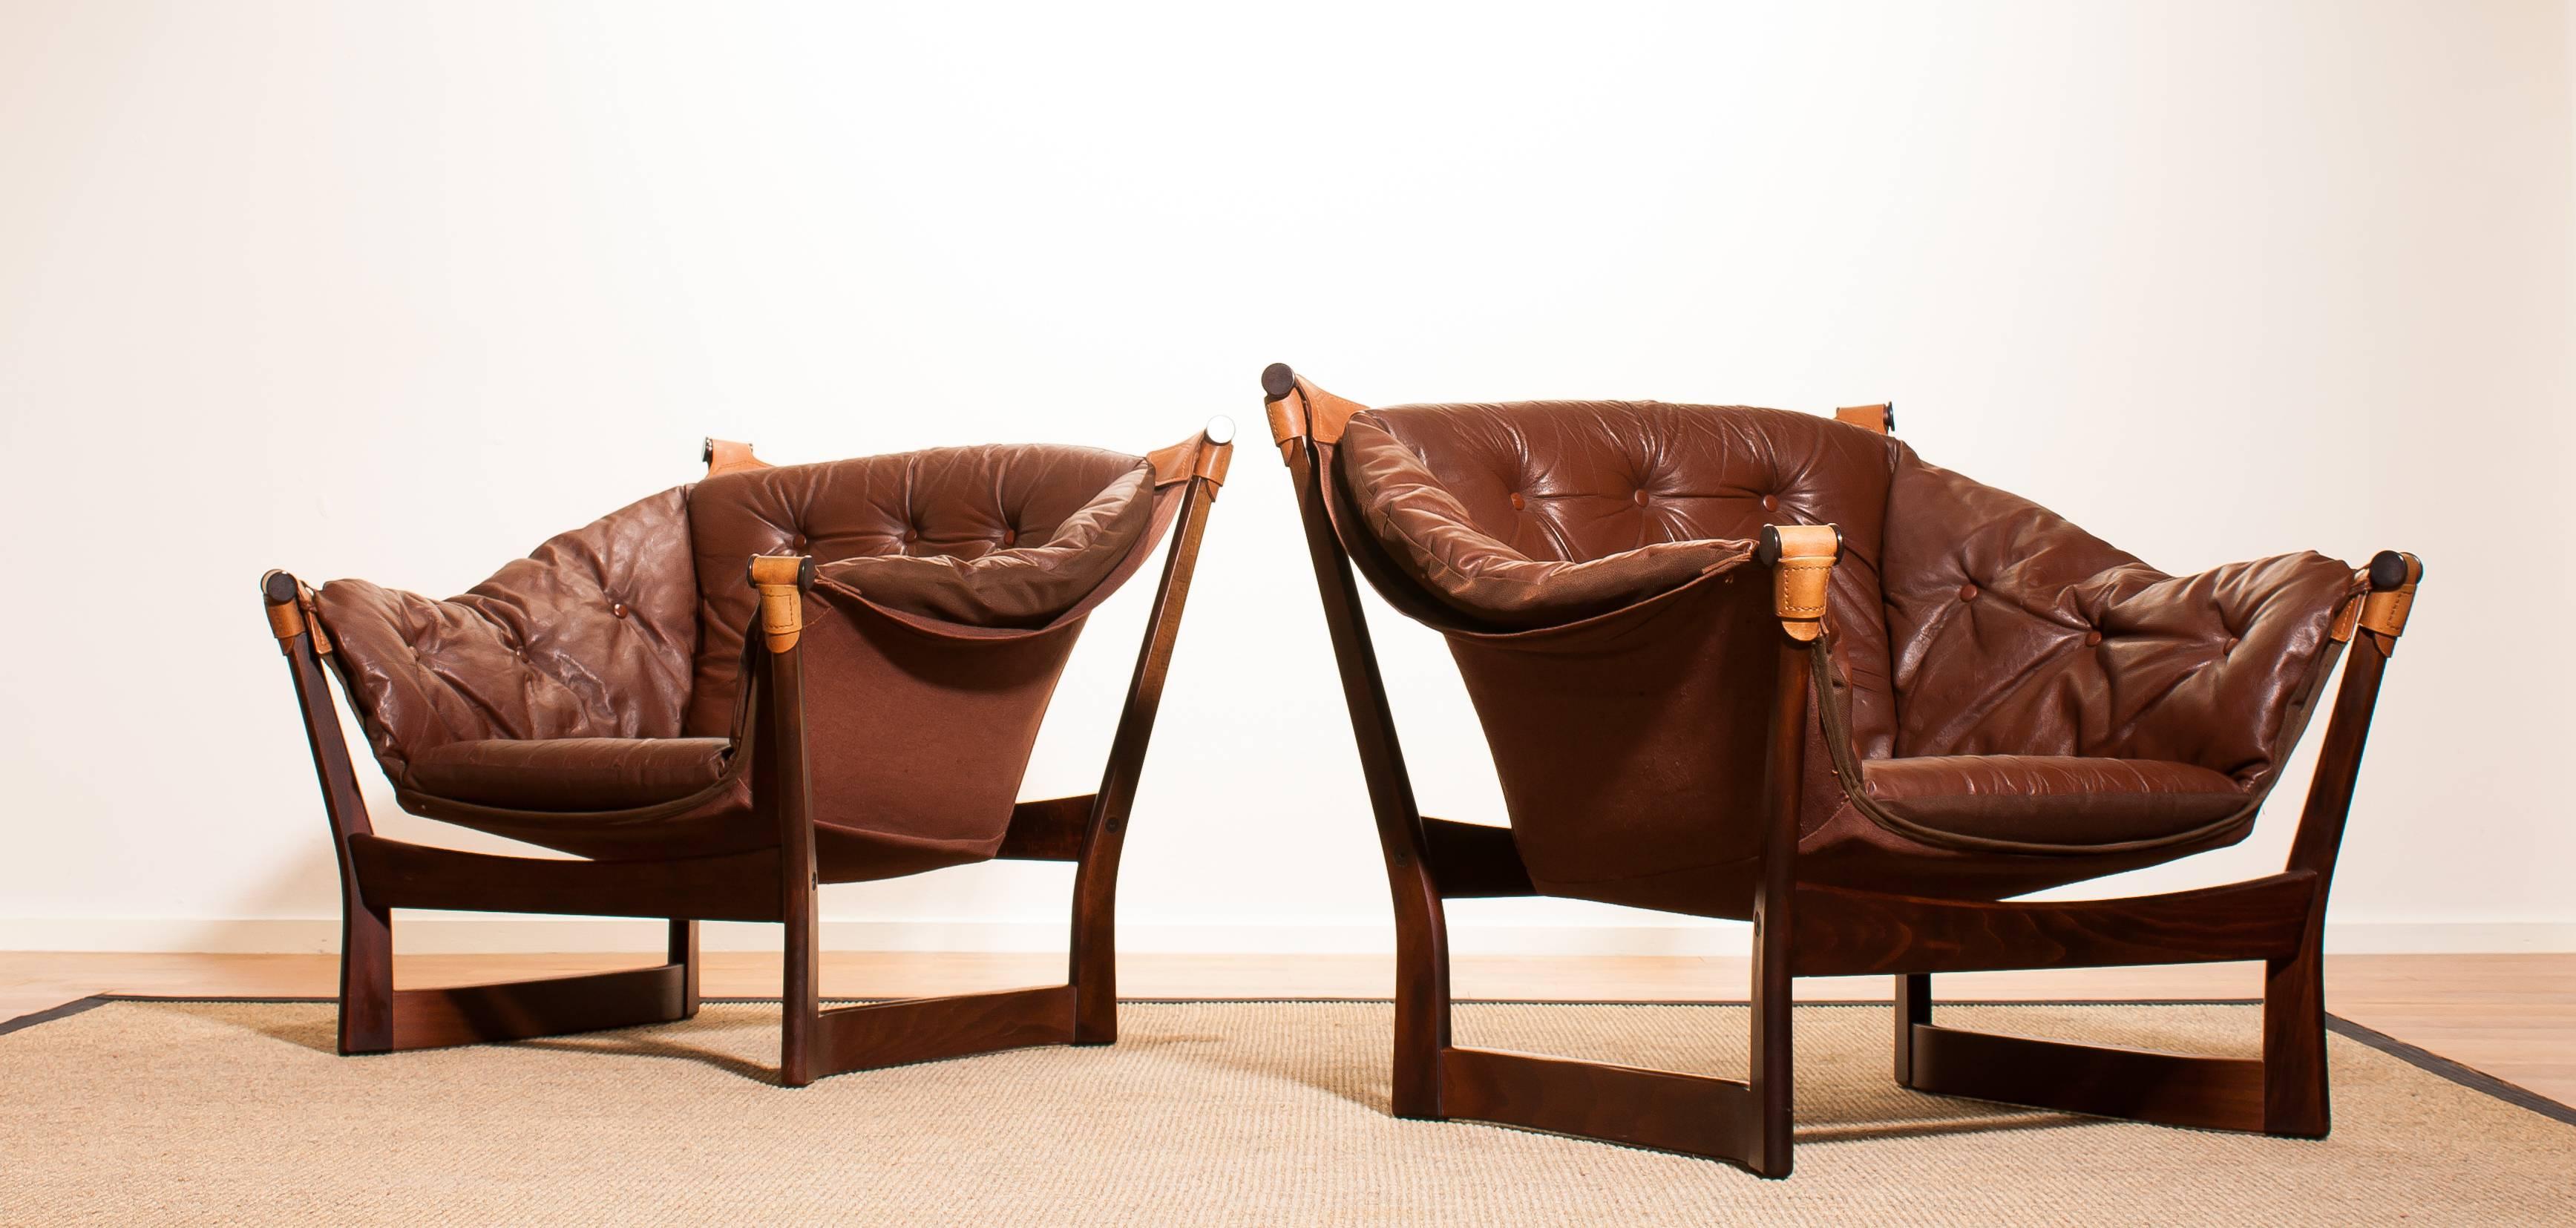 Very beautiful pair of Scandinavian modern easy chairs designed by Tormod Alnaes for Sørliemøbler Norway.
They feature a wooden frame and are upholstered in dark brown leather.
The condition of the chairs is very good and they are very